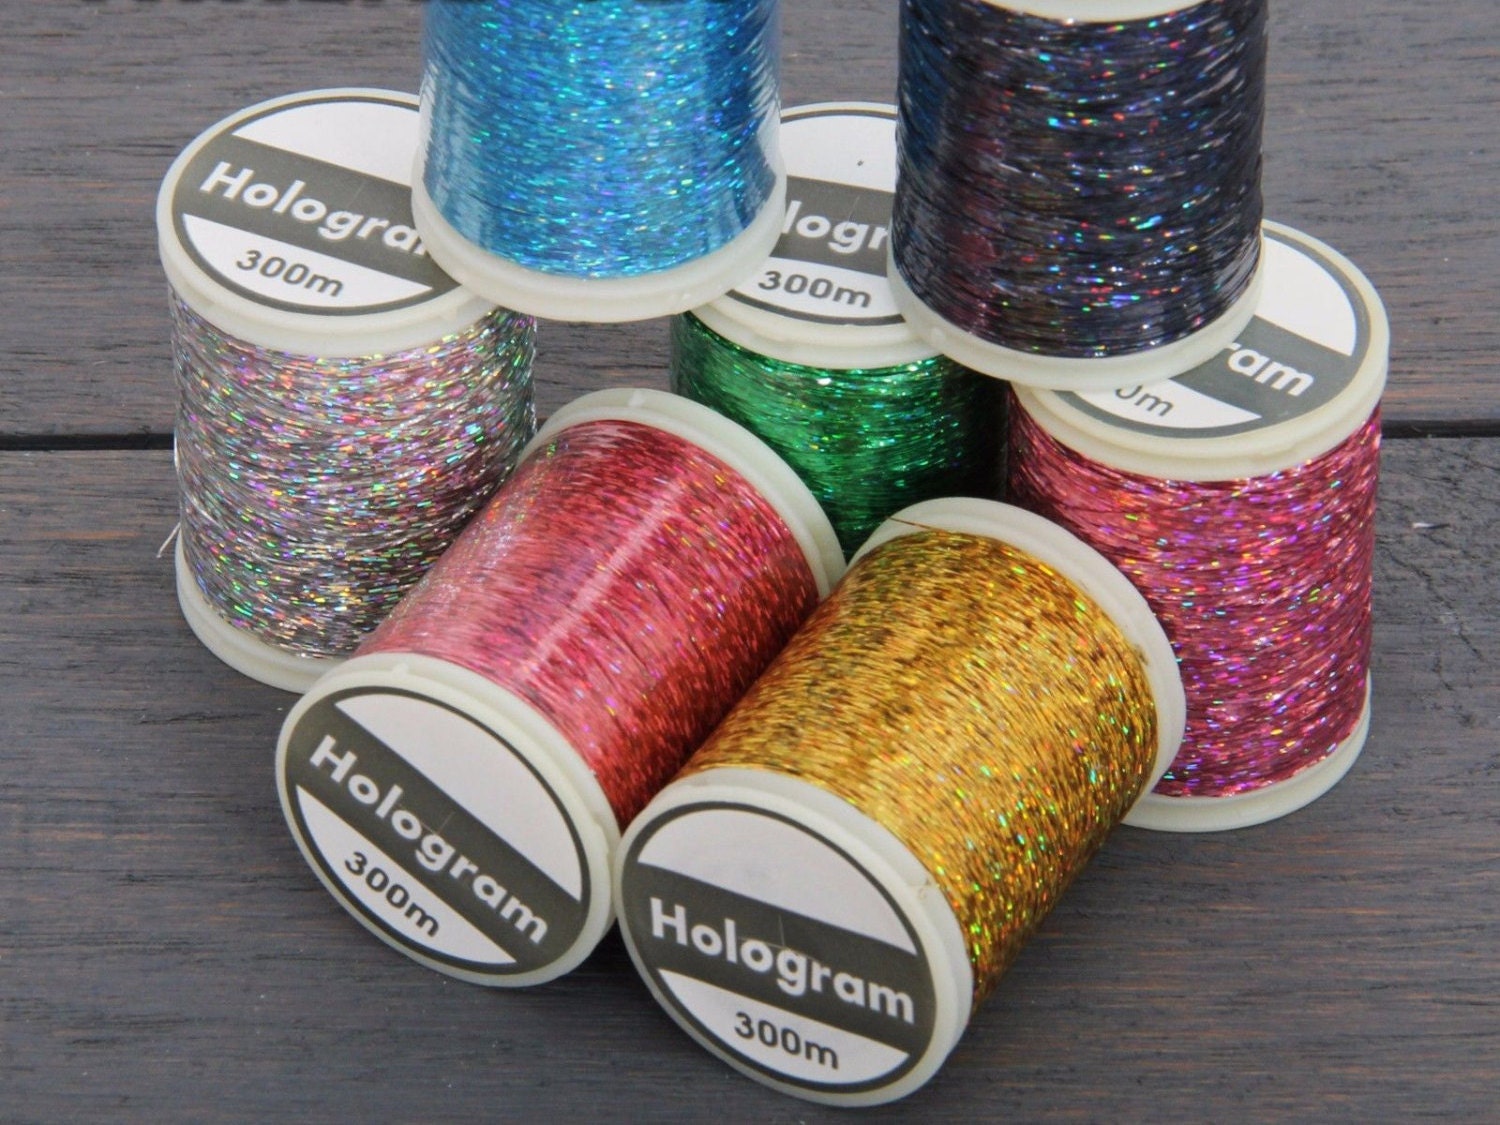 Metallic Silver Embroidery Thread Hand And Machine Embroidery Thread